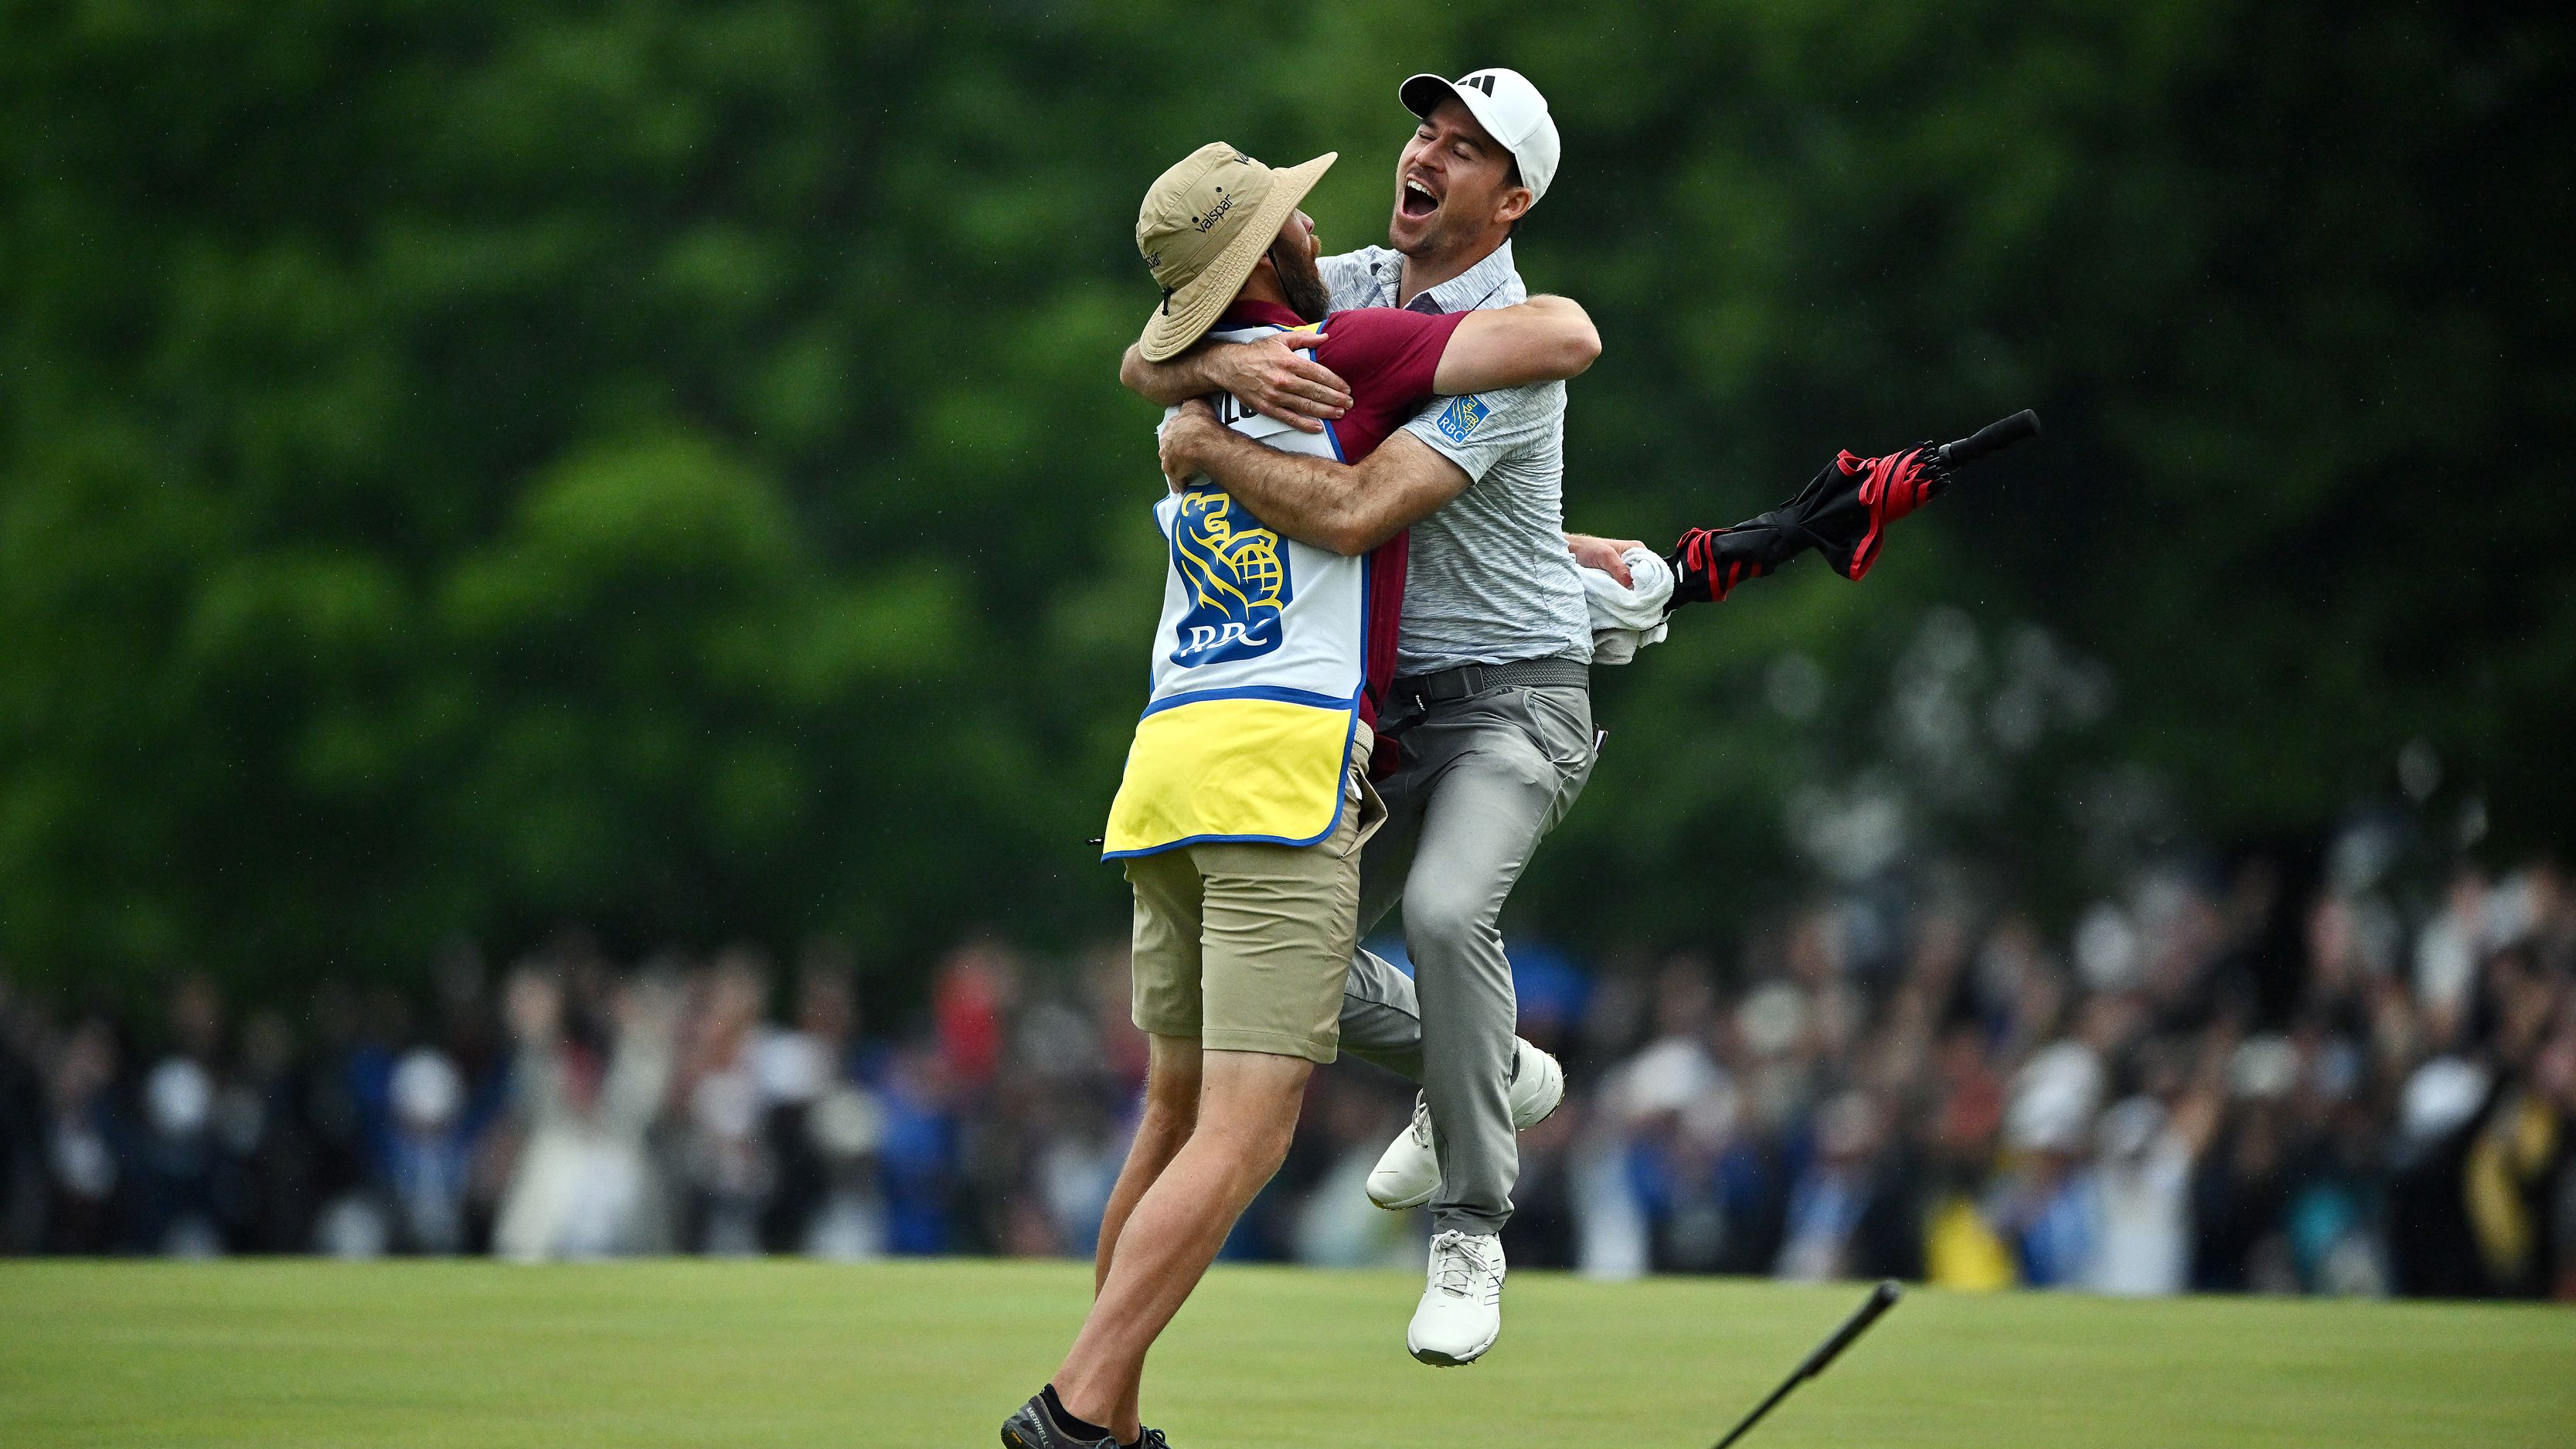 RBC Canadian Open Draws Highest Viewing Figures Since…